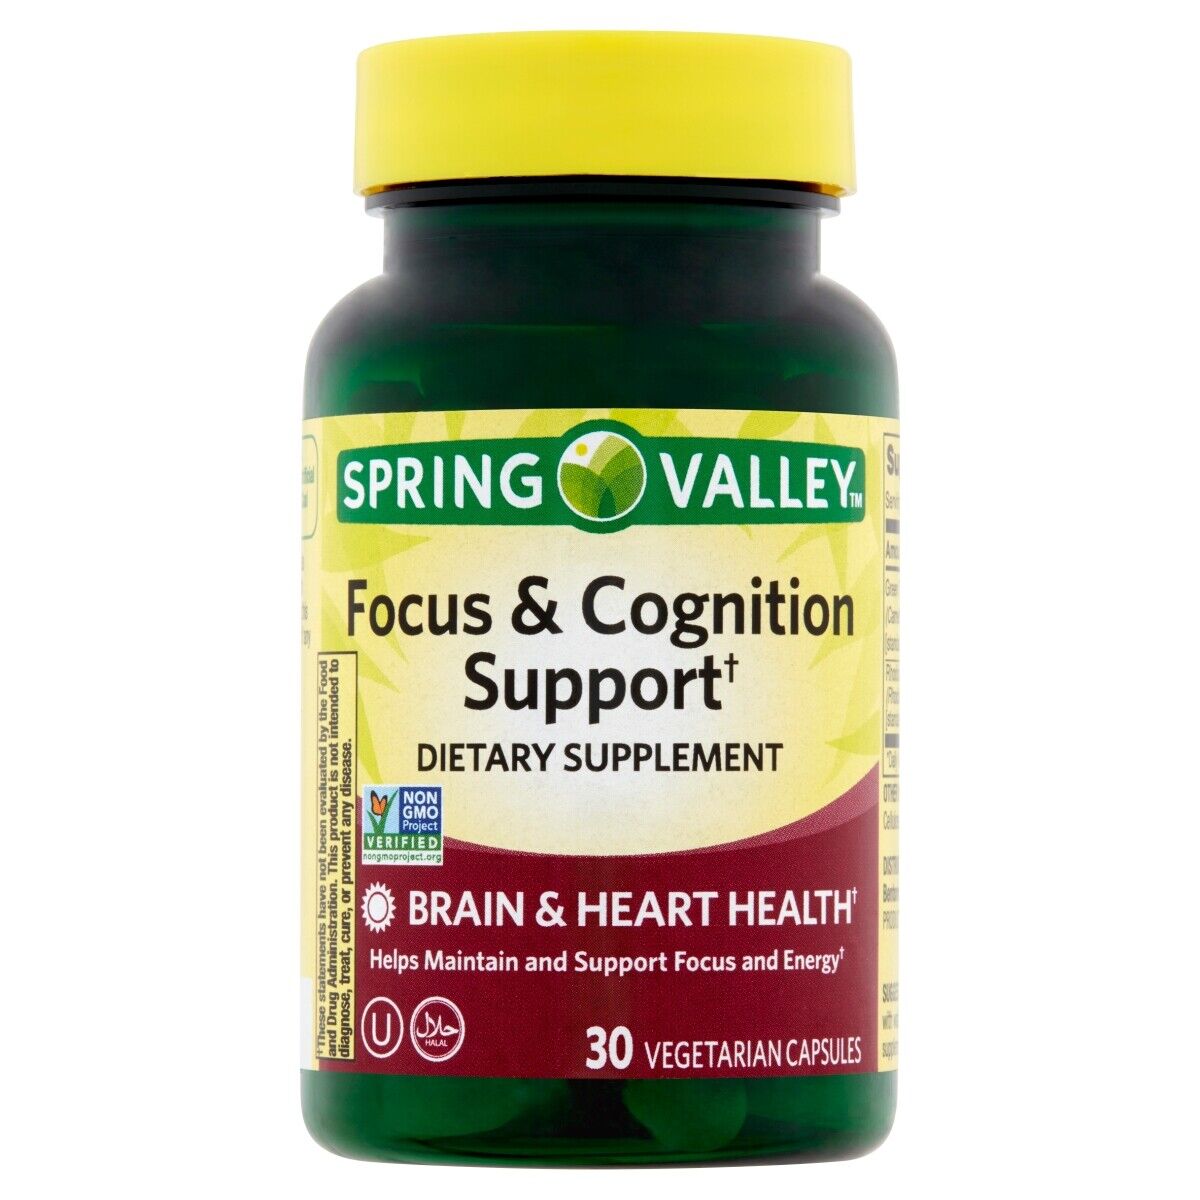 Spring Valley Focus & Cognition Support Vegetarian Capsules, 30 Count+